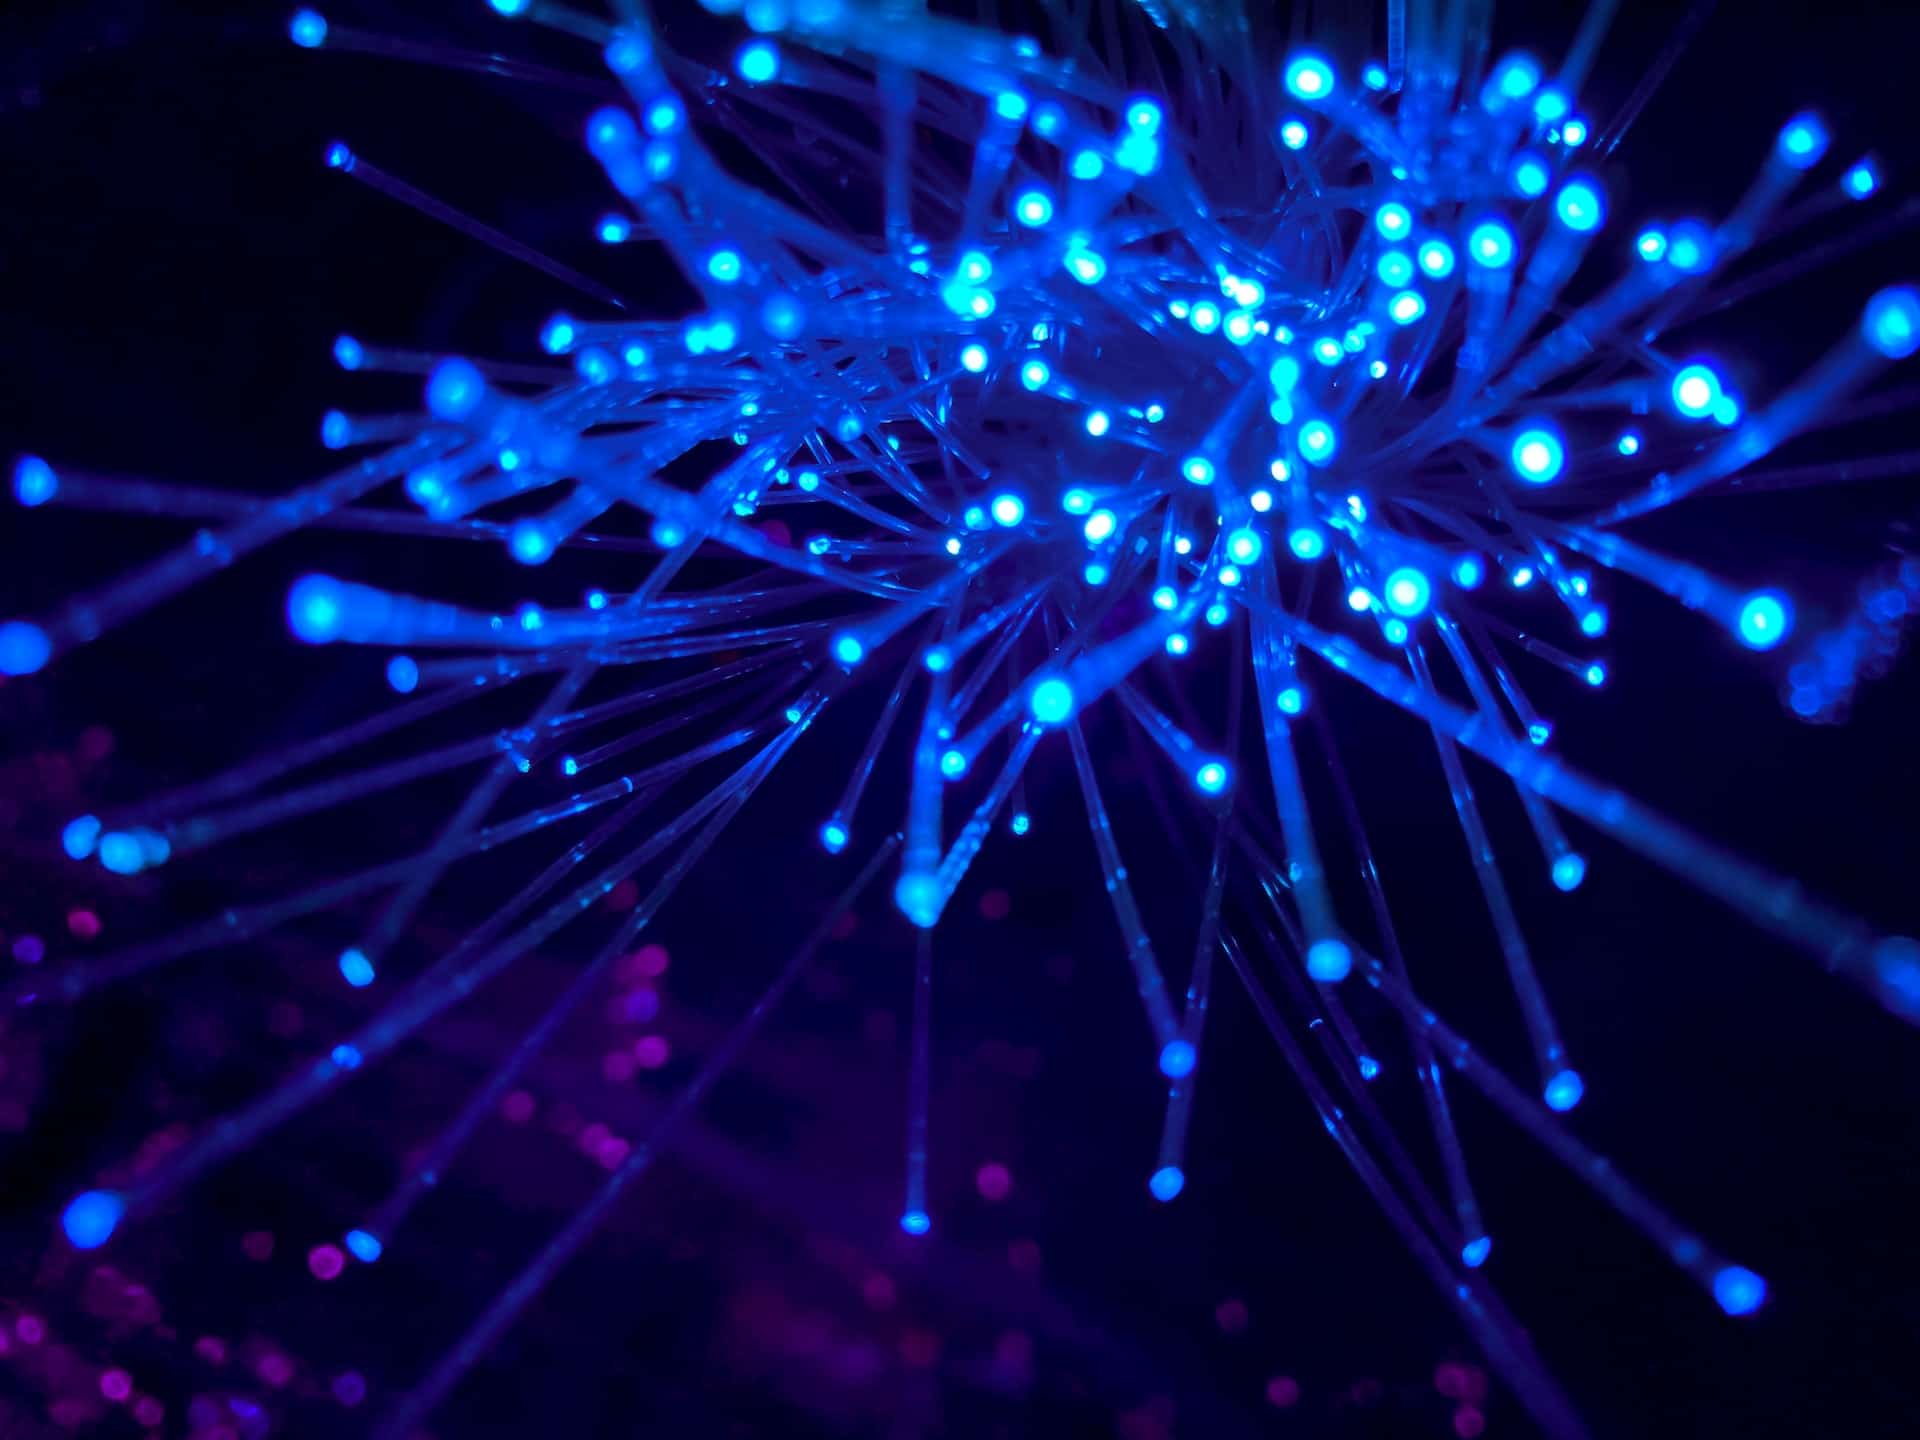 Abstract image of lights creating a network